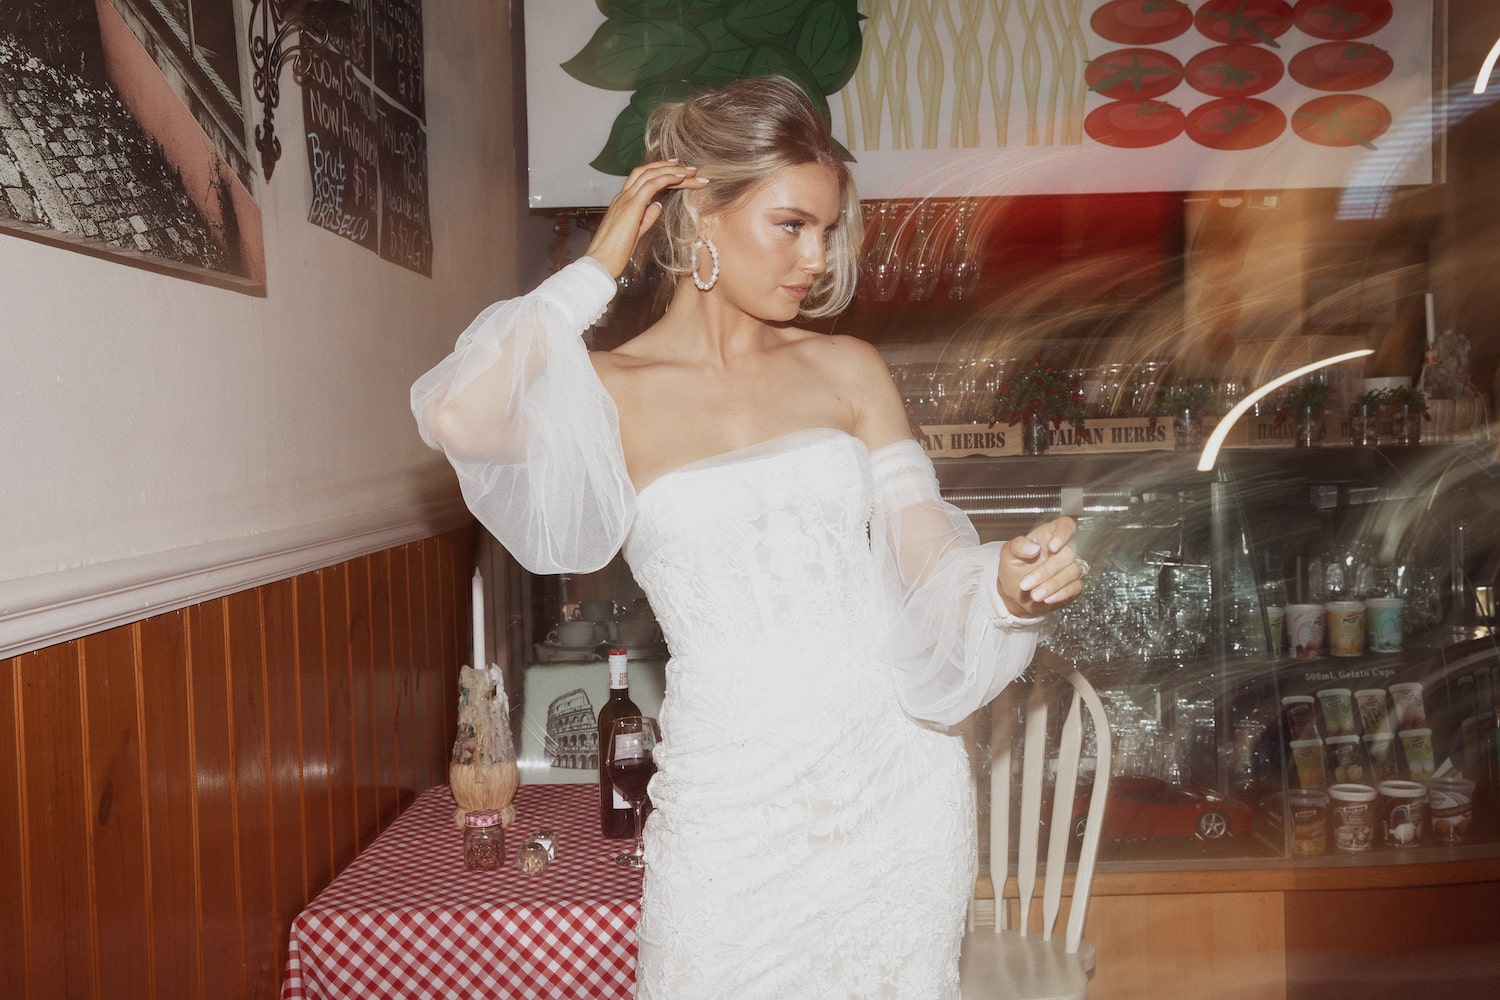 Model inside Italian cafe standing next to a small table with red and white check tablecloth. Wearing the Verona gown.